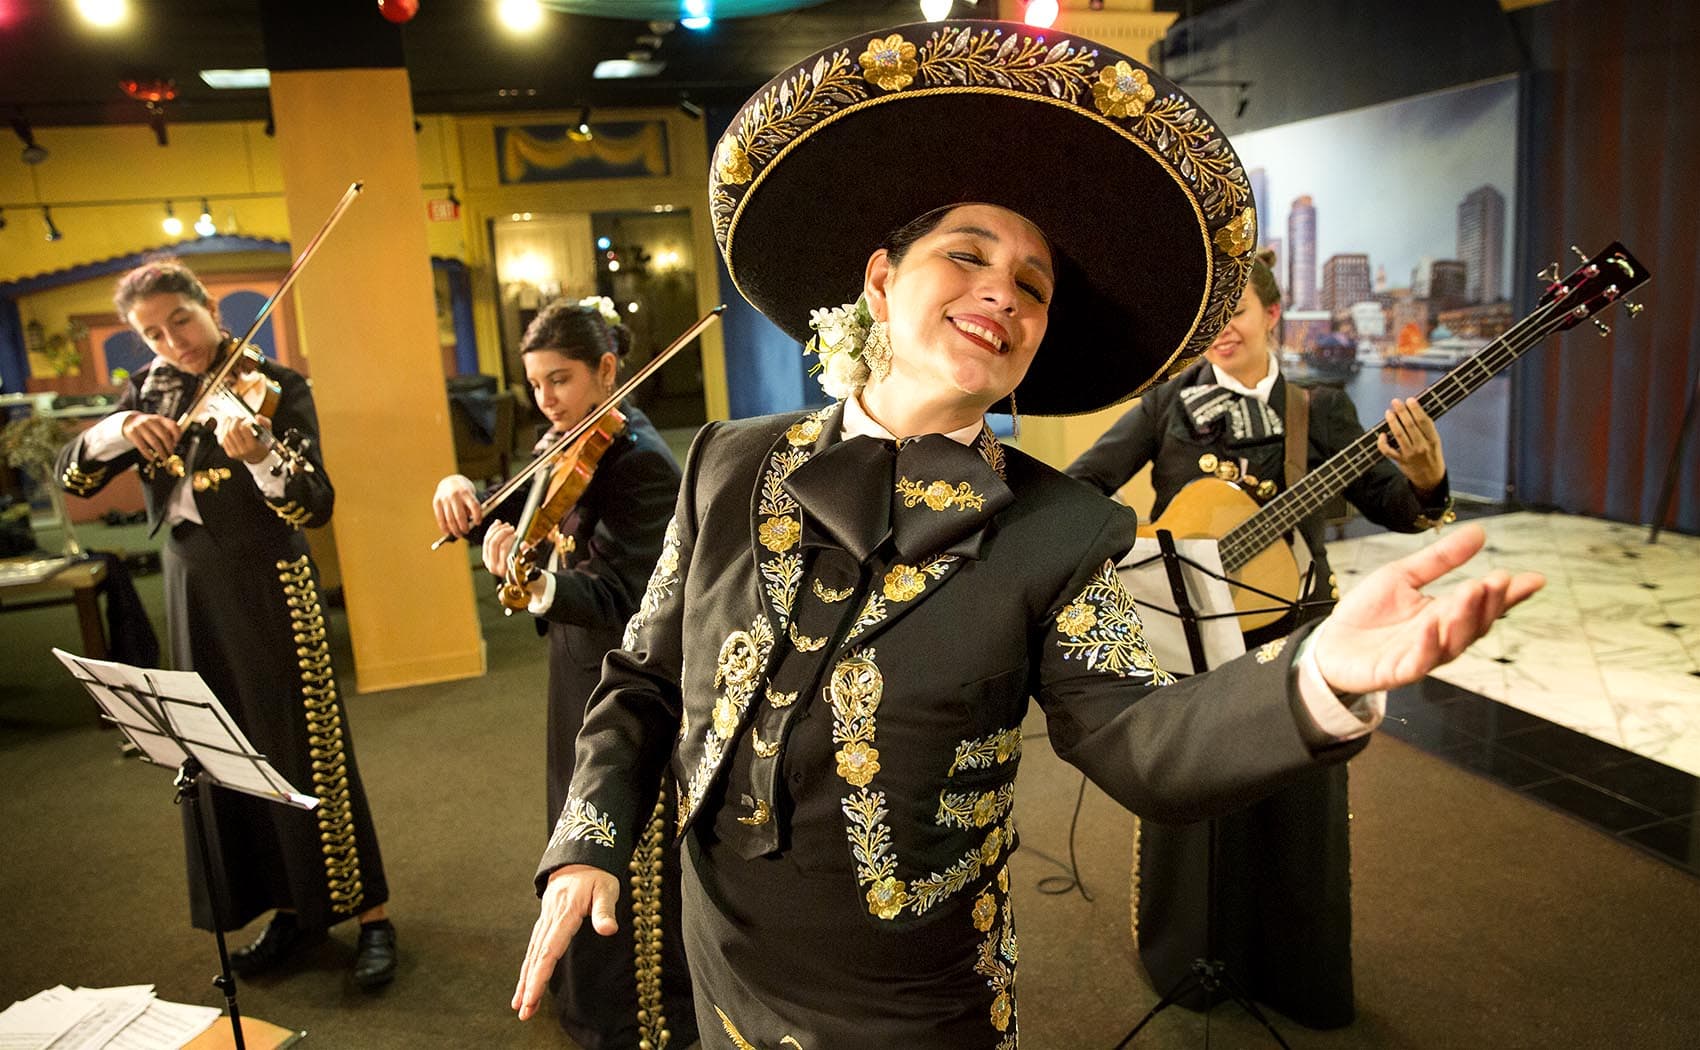 Veronica Robles rehearsing with her mariachi band in East Boston. (Robin Lubbock/WBUR)